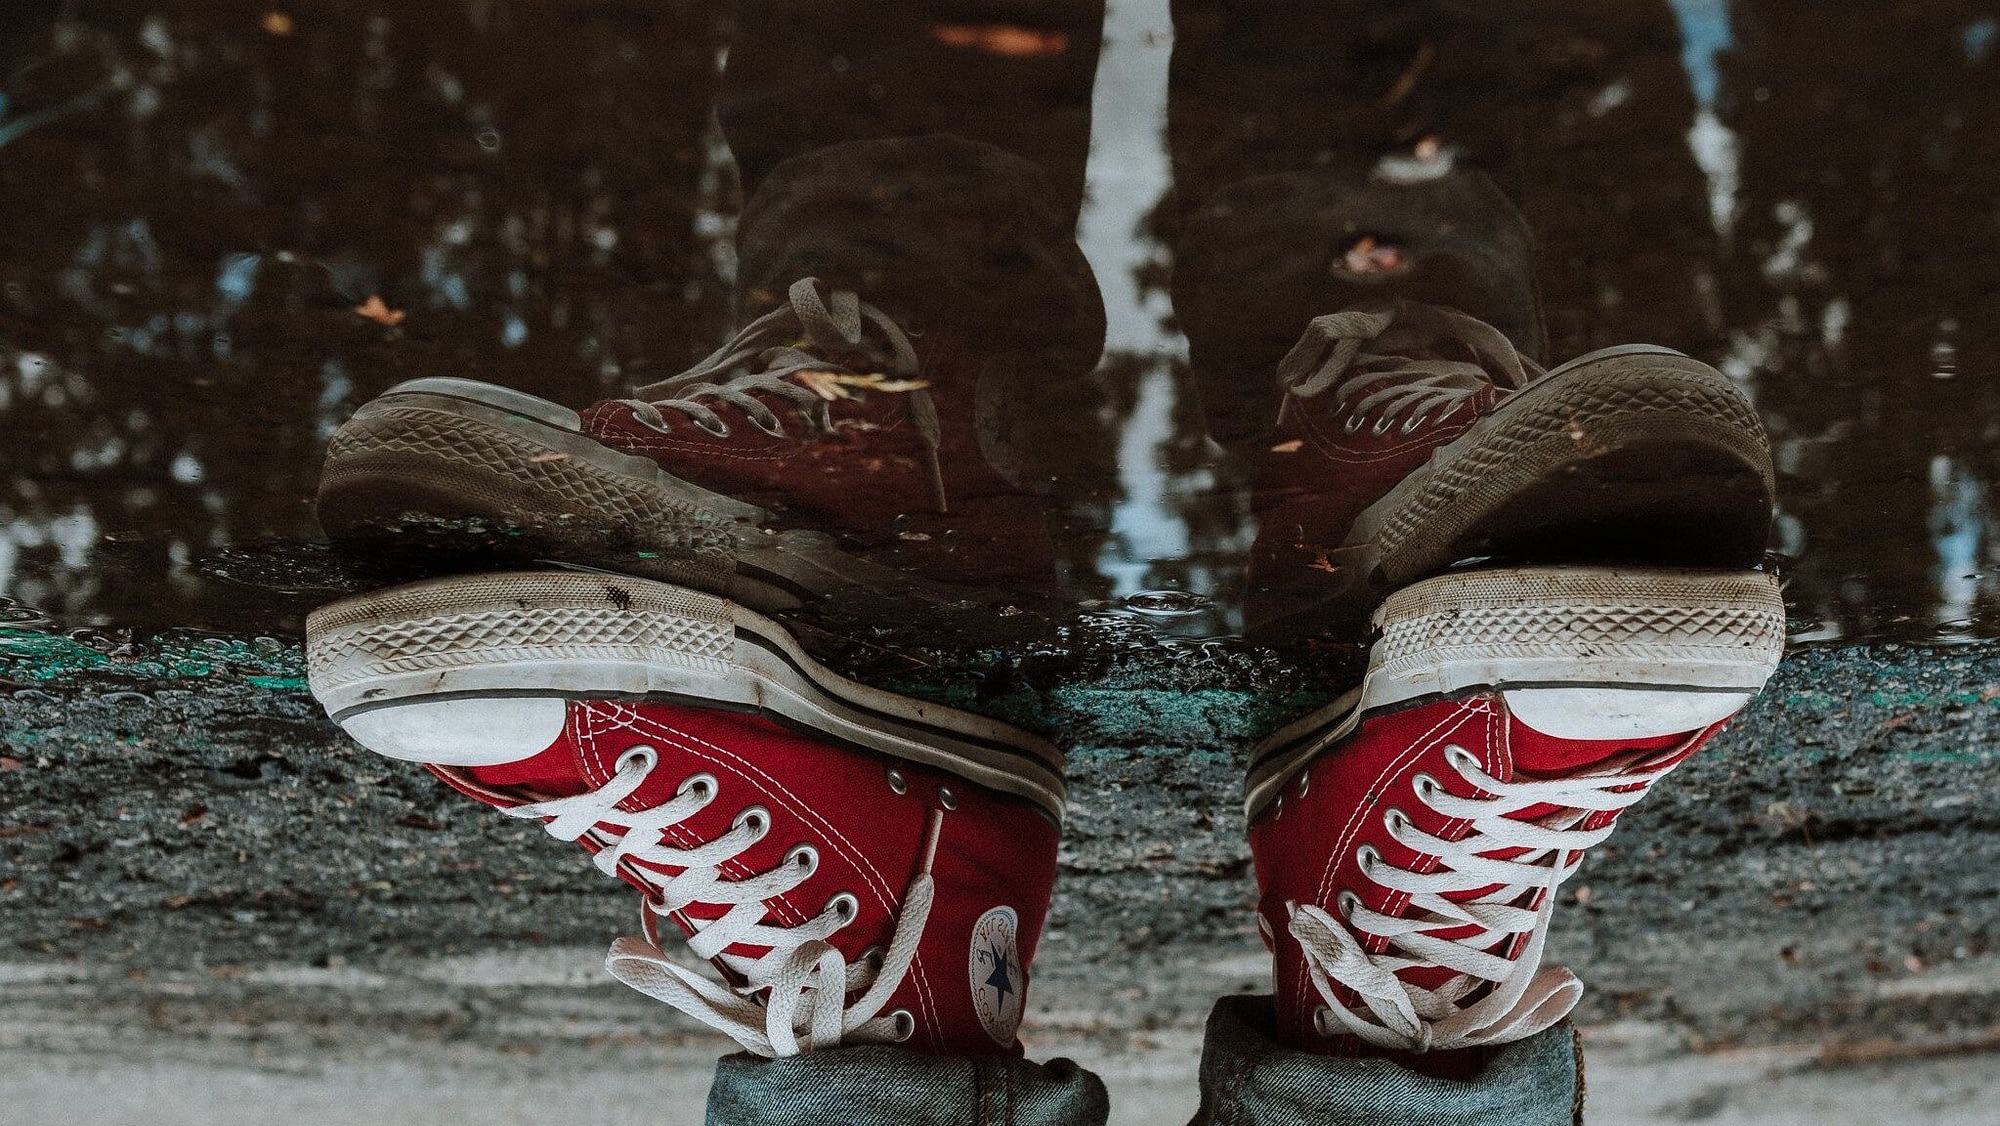 Image: The reflection of red sneakers in a puddle, looking upside down.